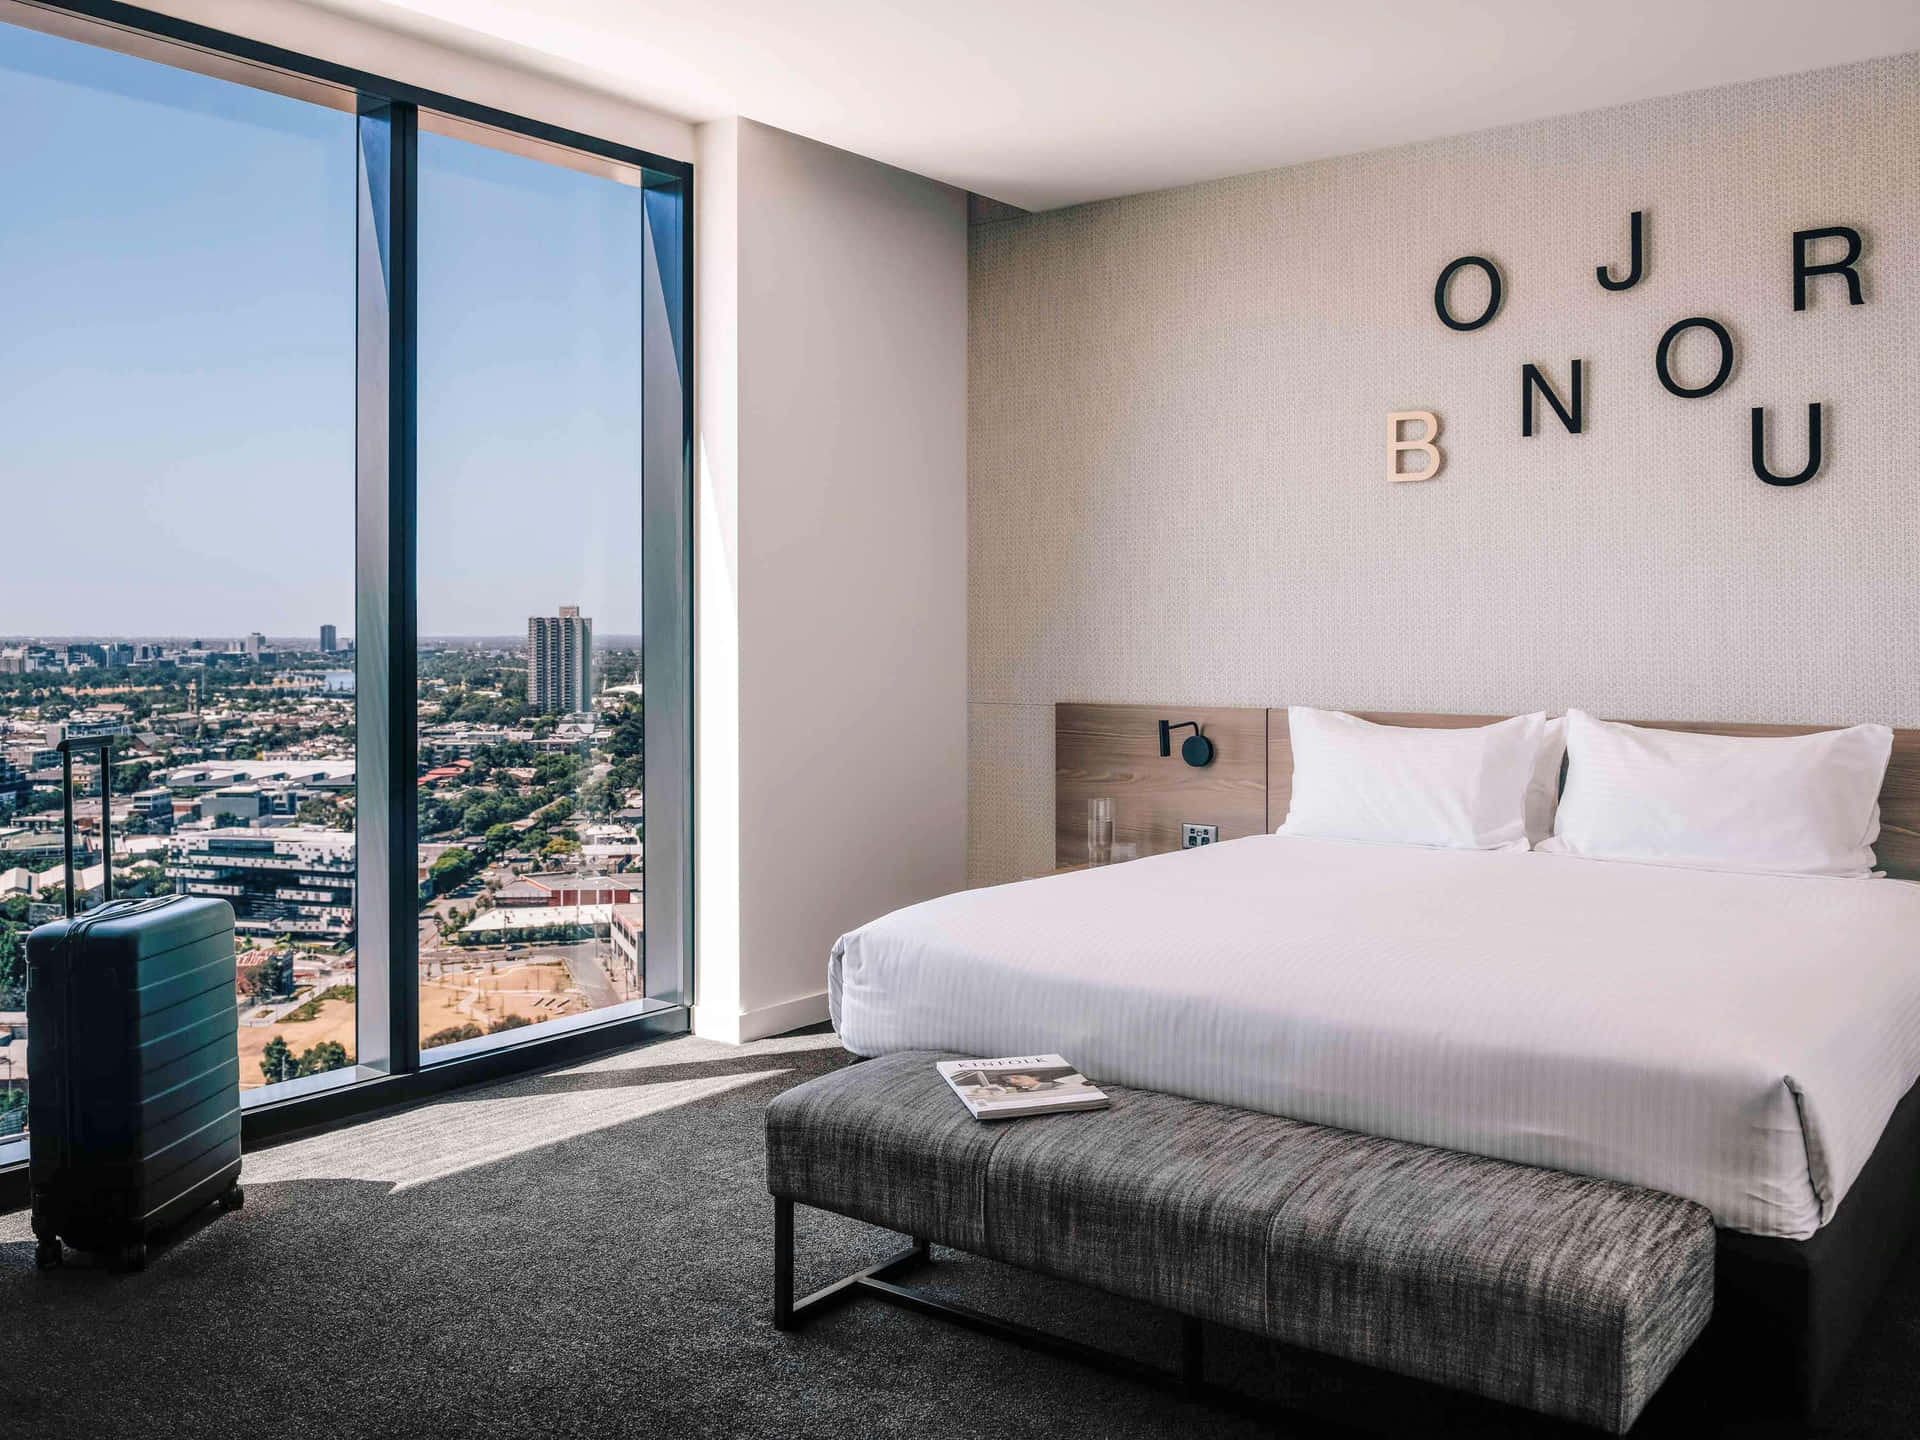 Modern Hotel Roomwith City View Melbourne Wallpaper